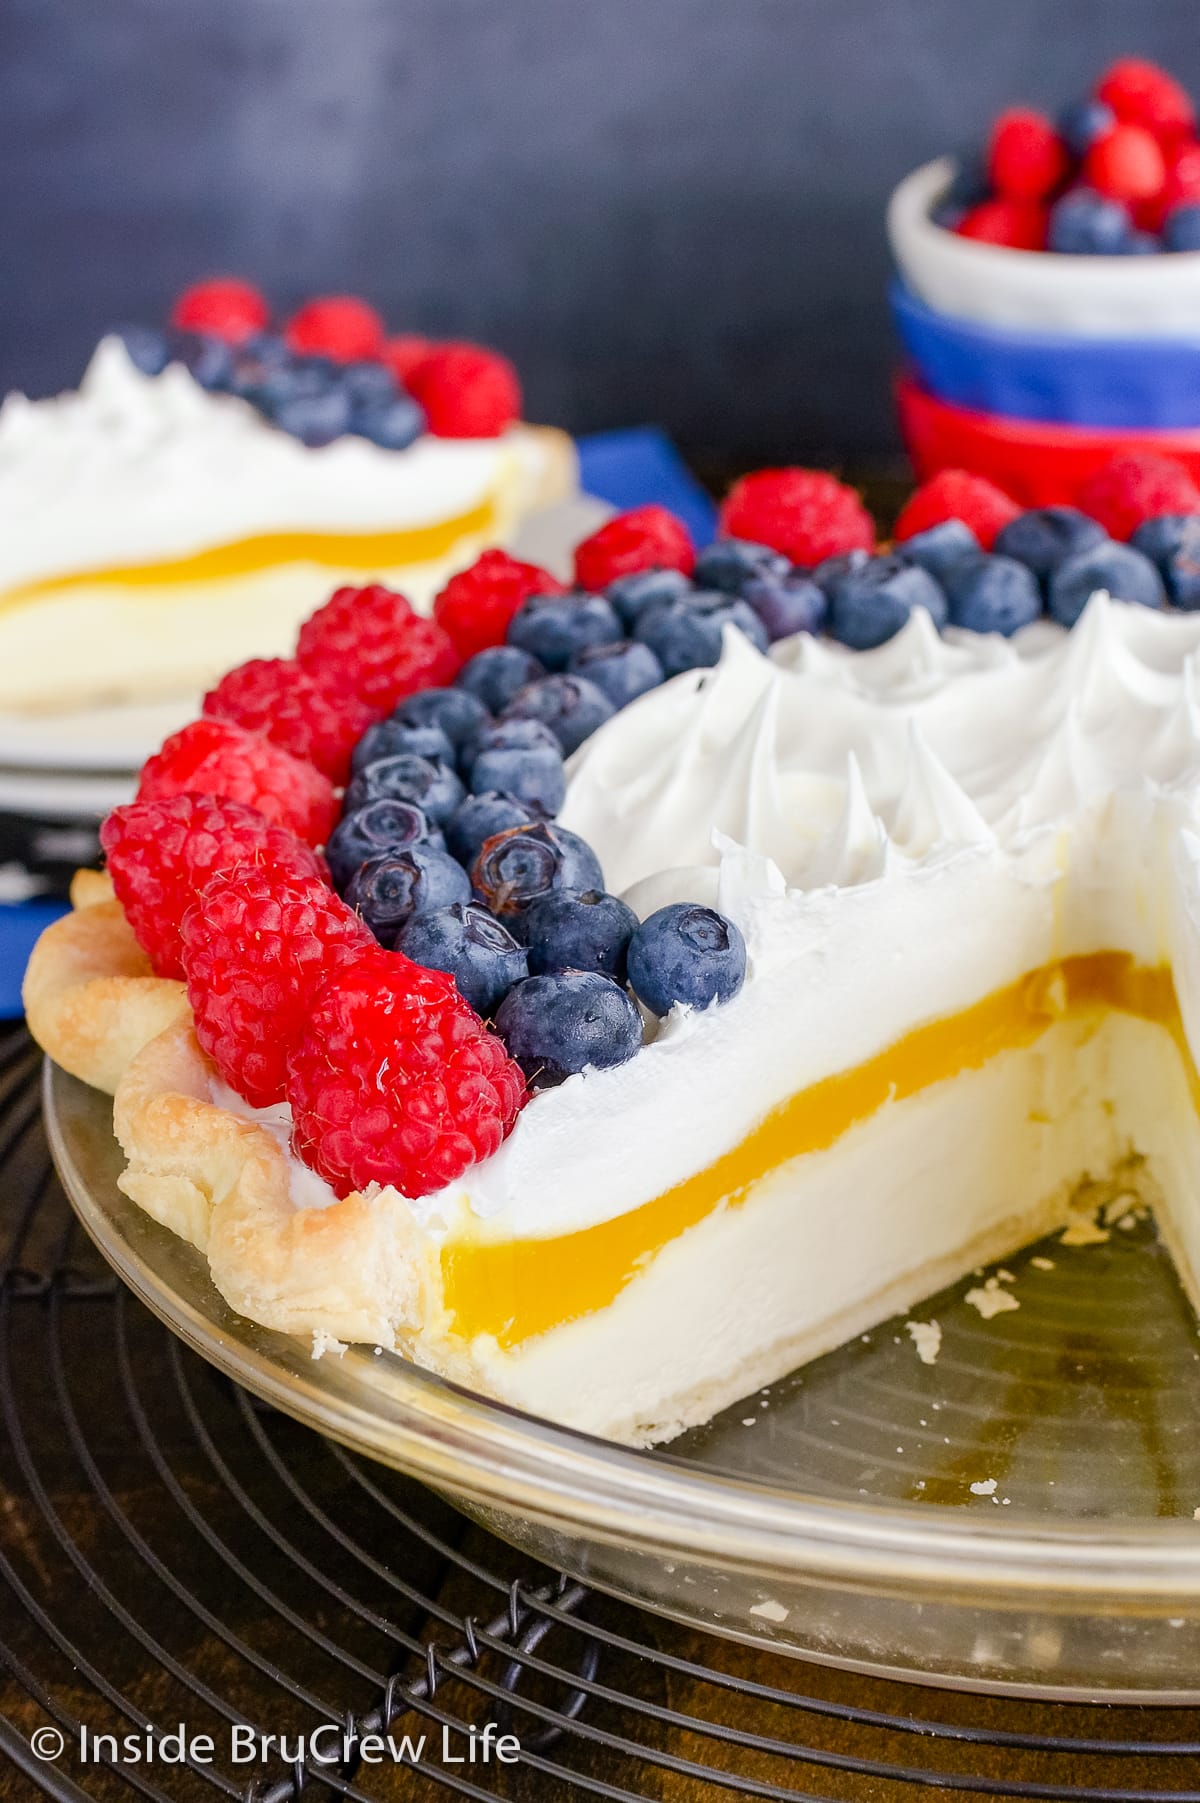 A lemon cream pie topped with fresh berries.